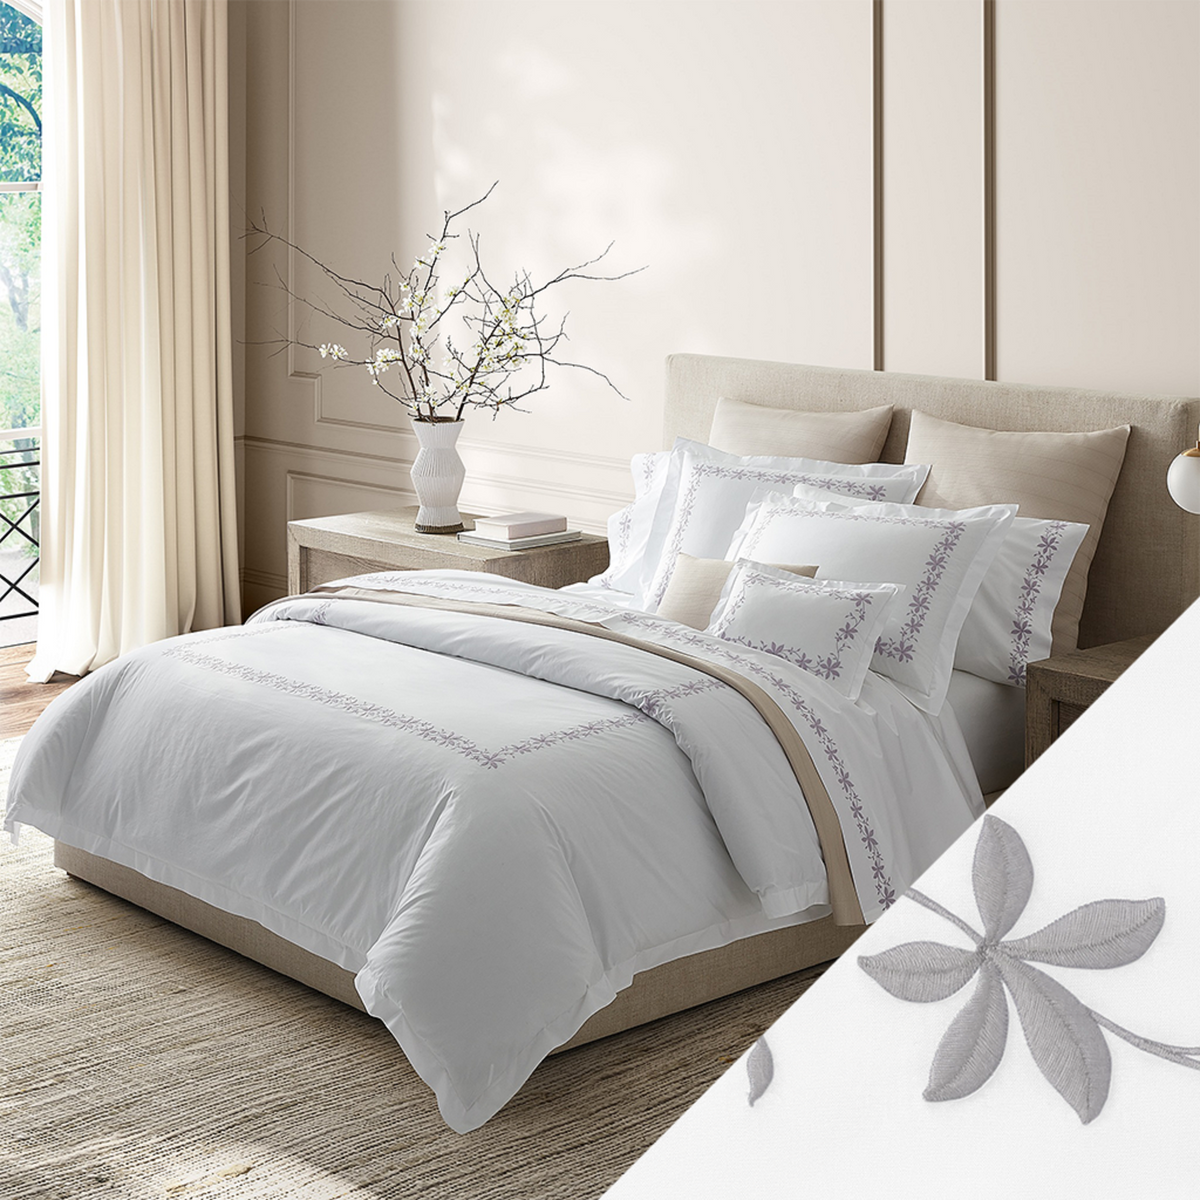 Horizontal View of Matouk Callista Bedding Collection with Swatch in Silver Color